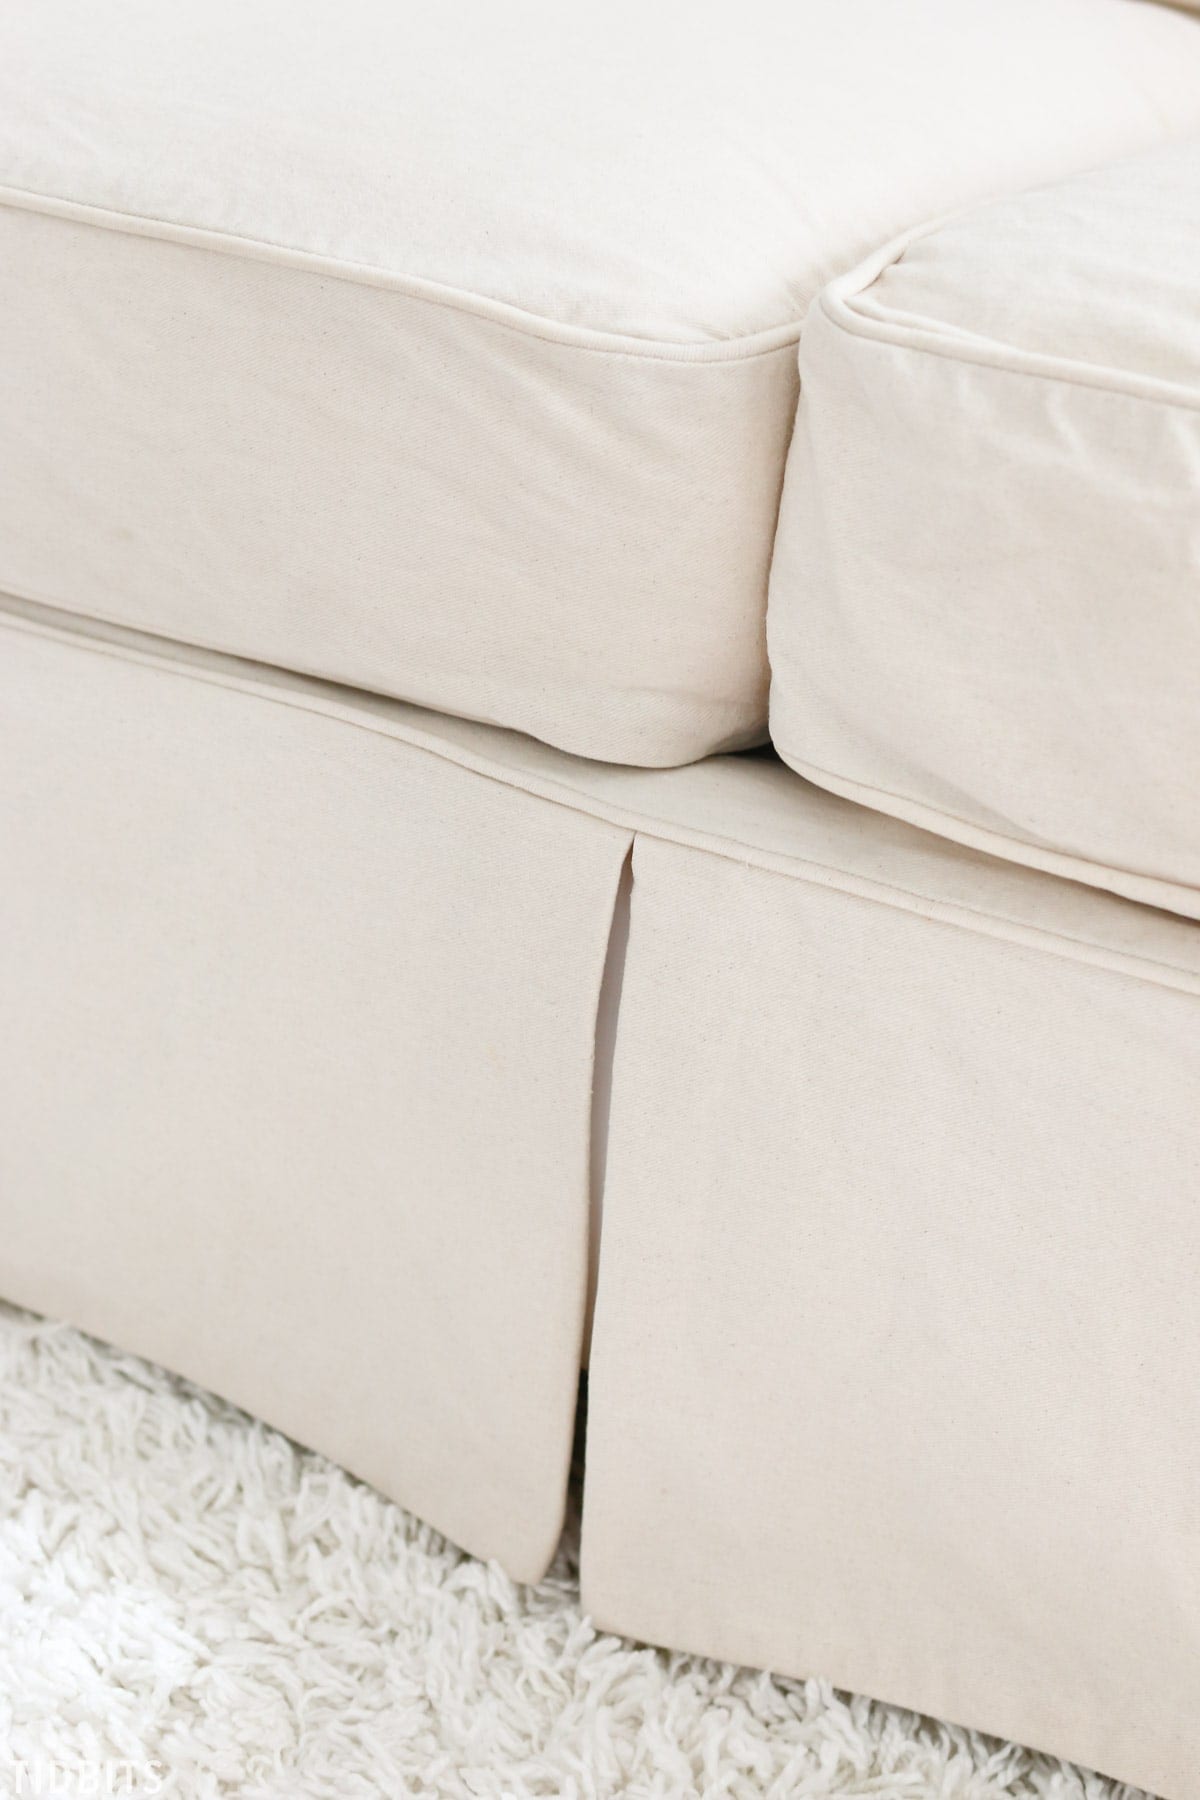 Tips and tricks for cleaning slipcovers naturally. 4 kids + white sofa . . . no problem!